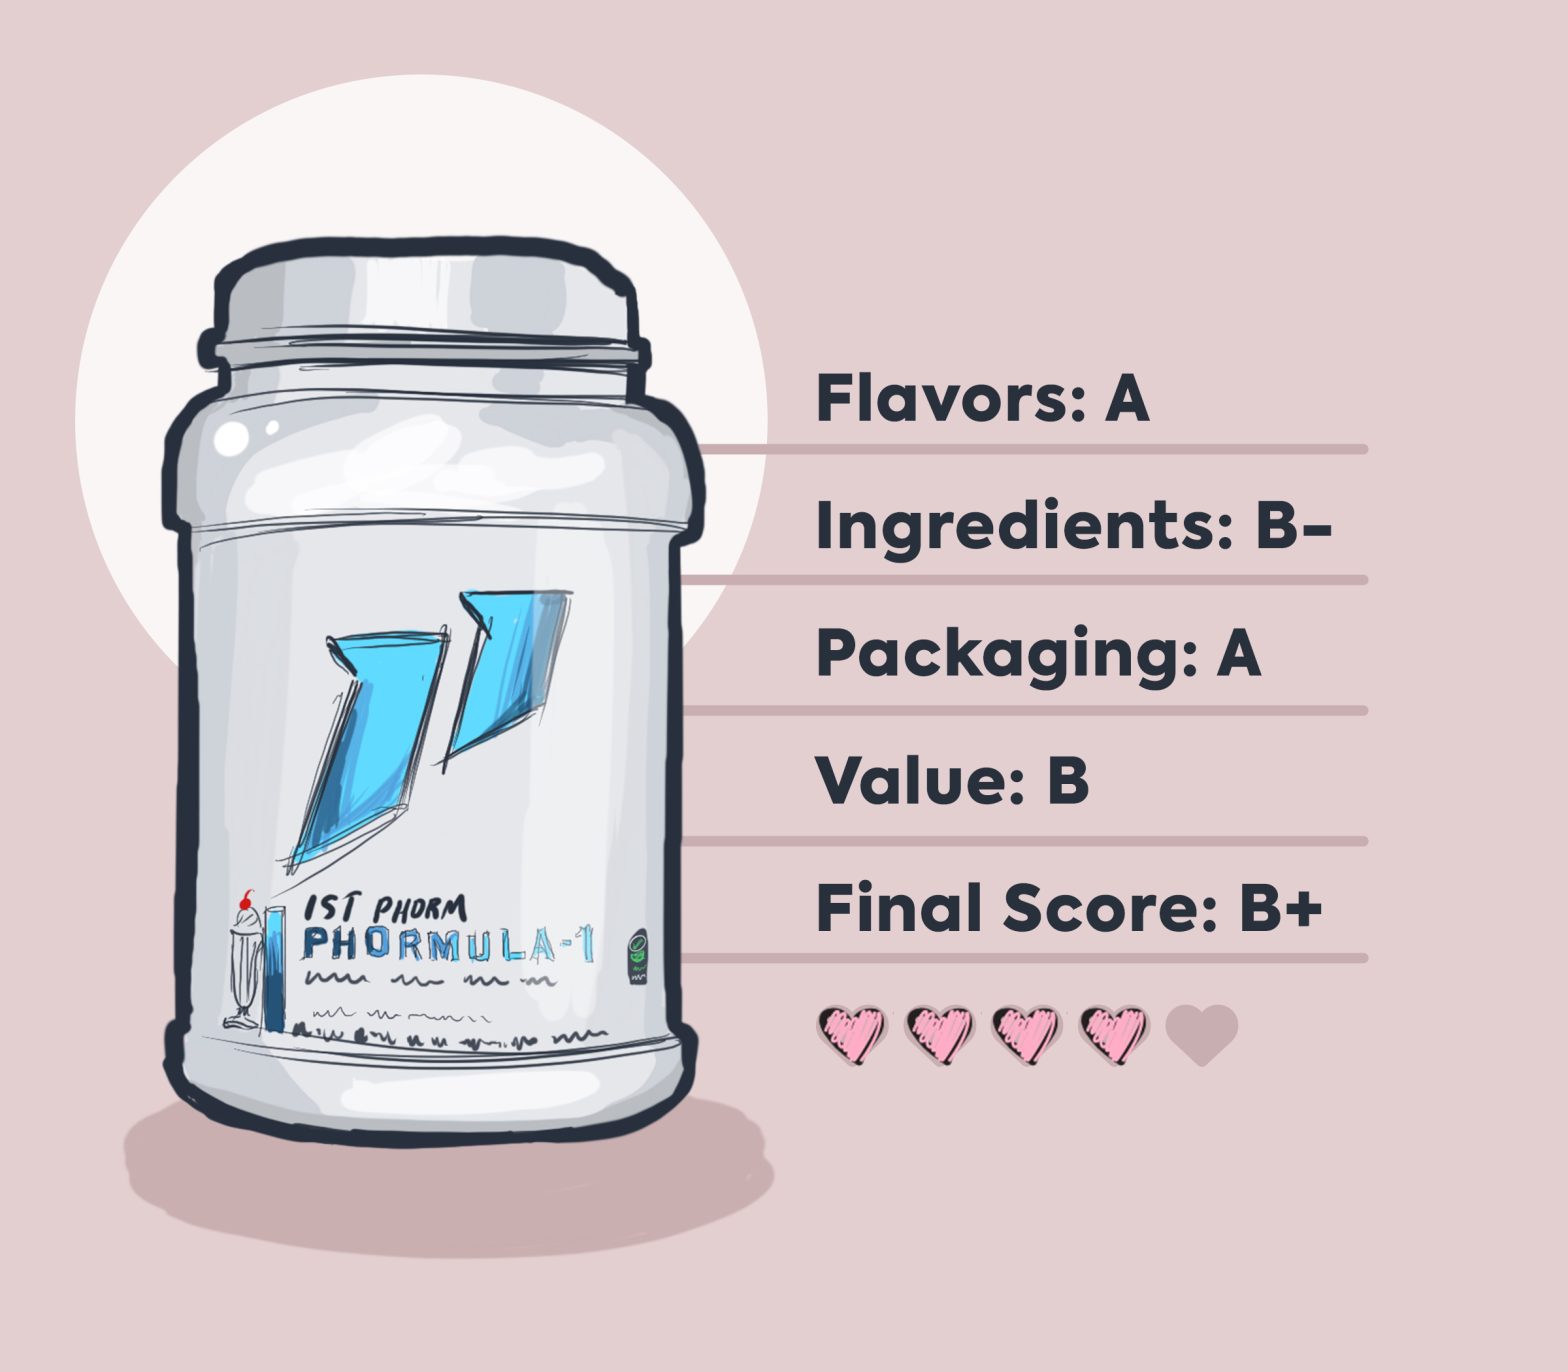 1st Phorm protein packaging illustration with review score data on pink background